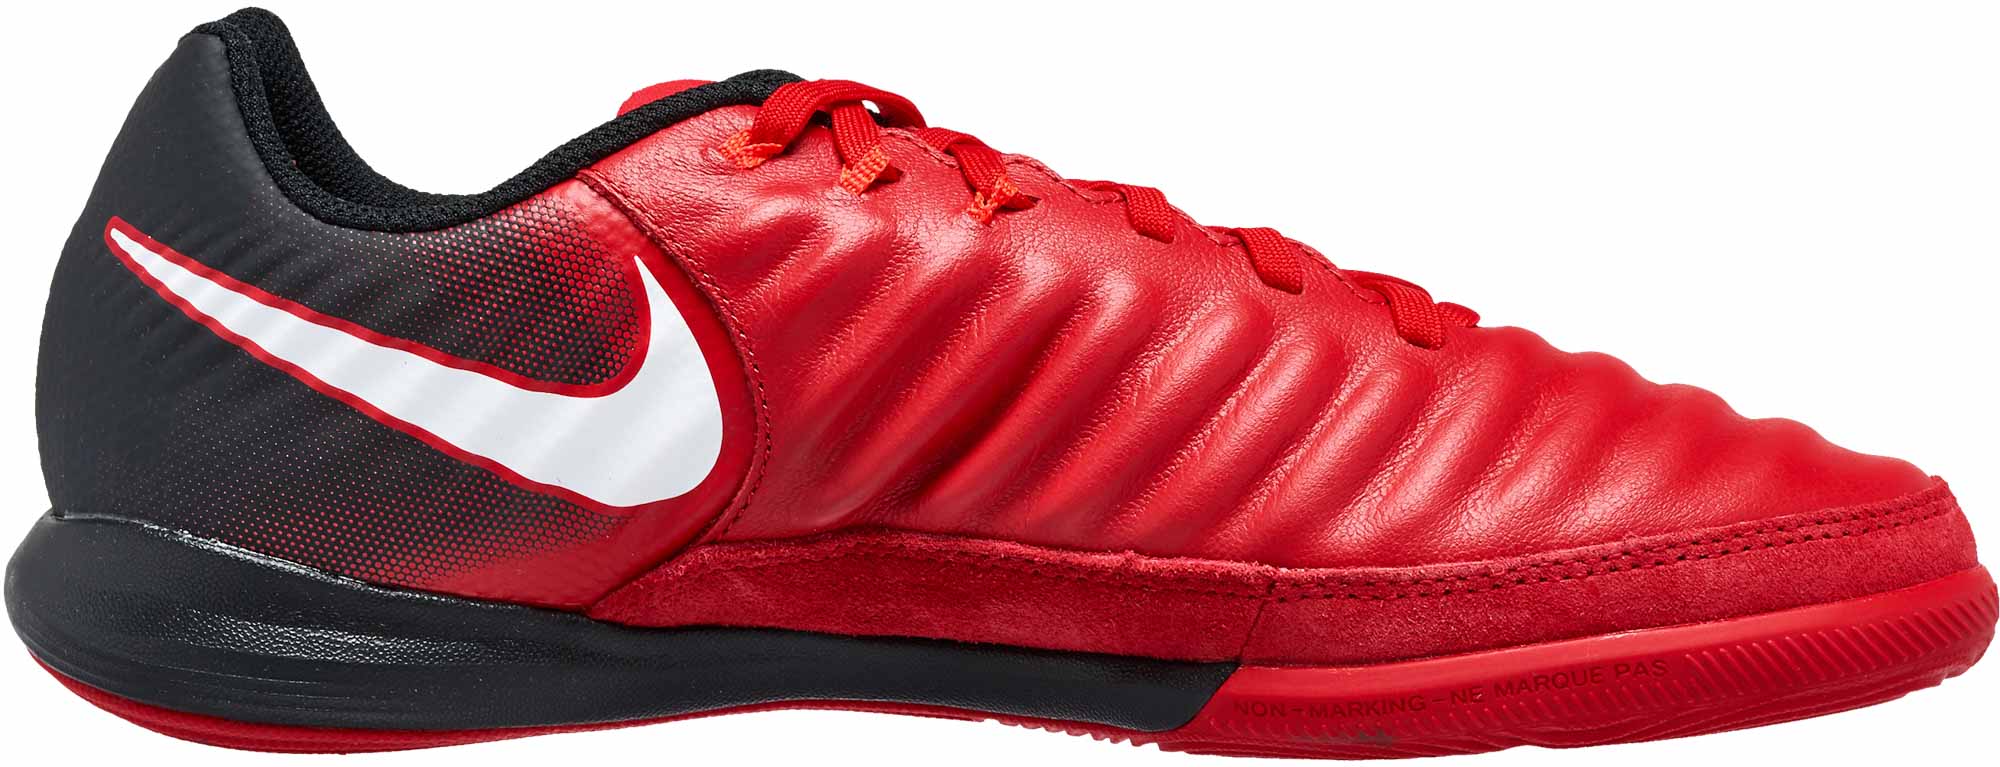 Nike TiempoX Finale IC - University Red & White - Soccer Master